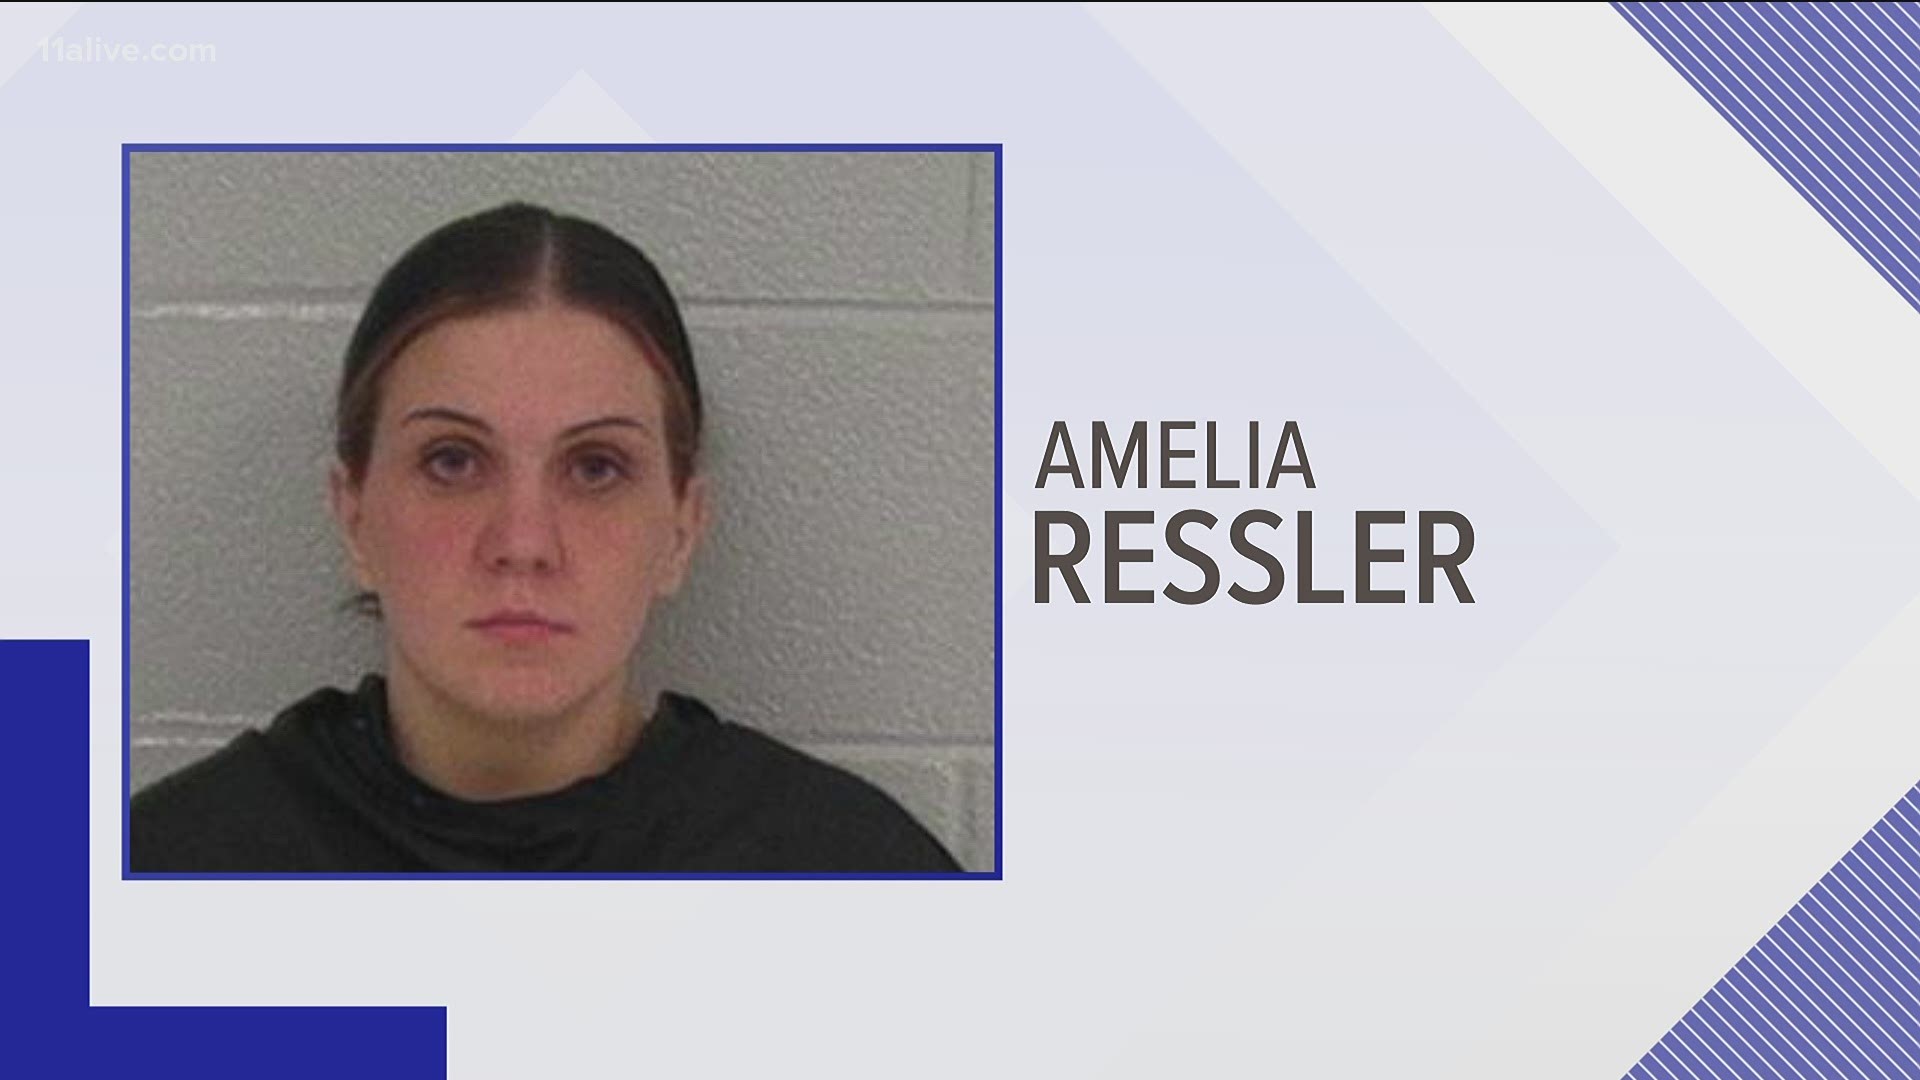 Officials said that Amelia Ressler is accused of engaging in 'indecent and immoral acts while in the presence of school-aged children.'